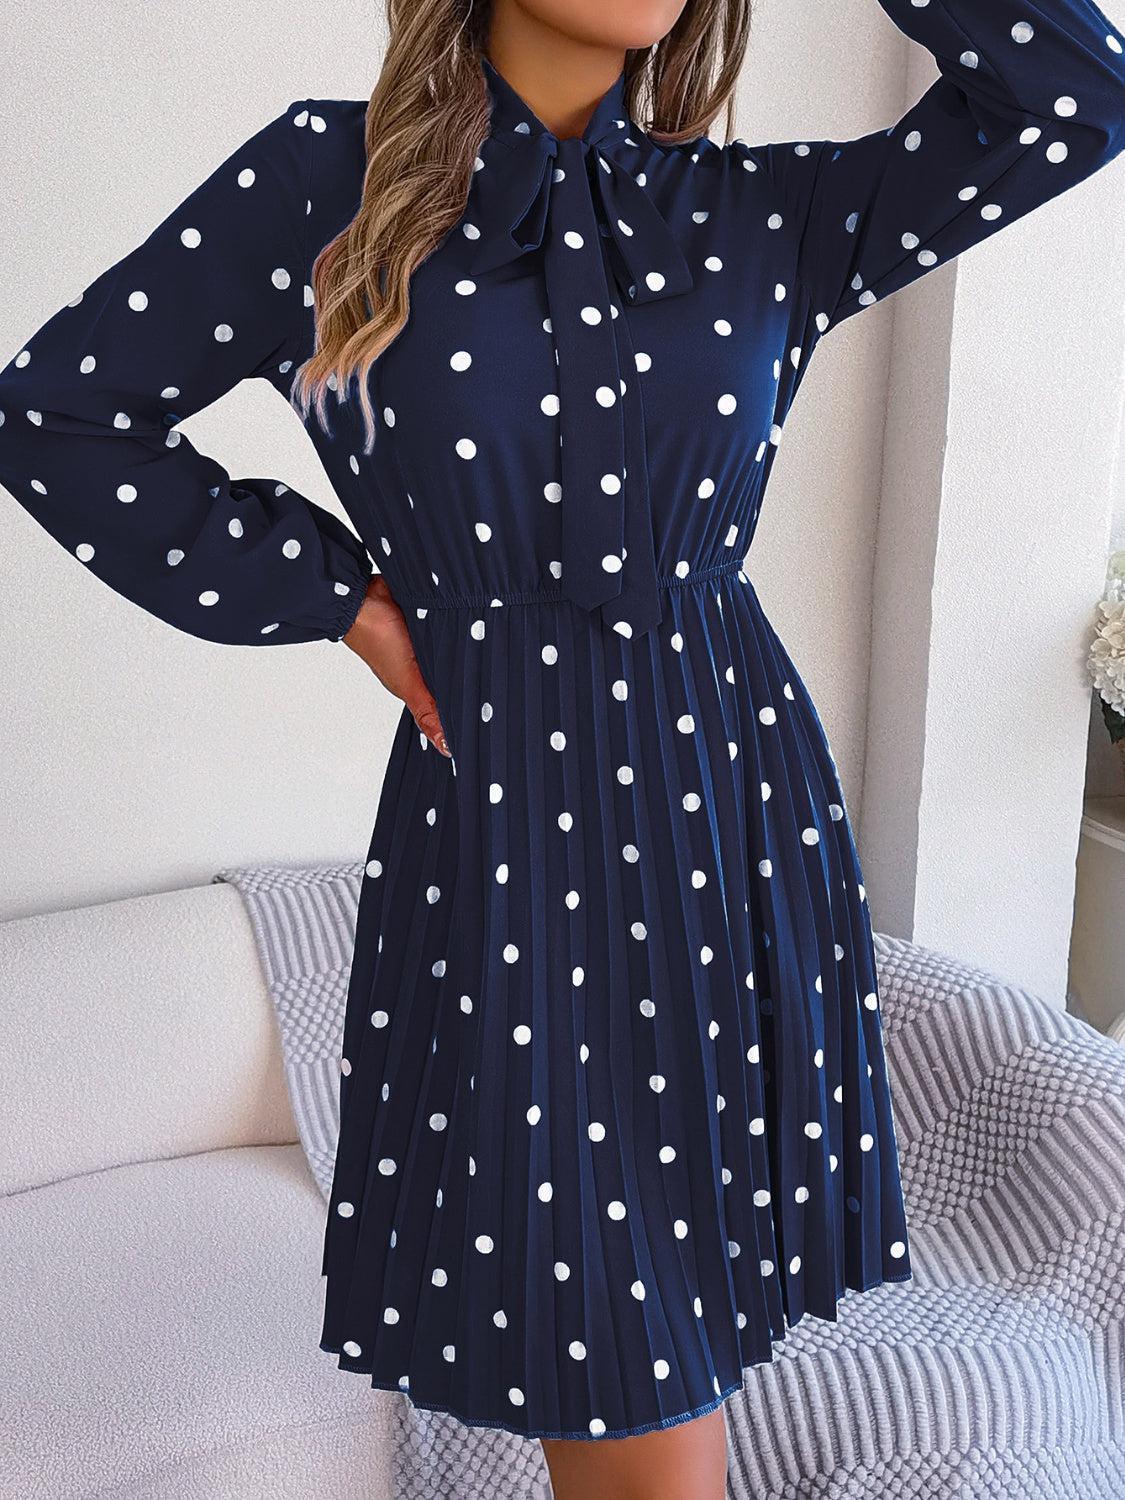 a woman in a blue dress with white polka dots